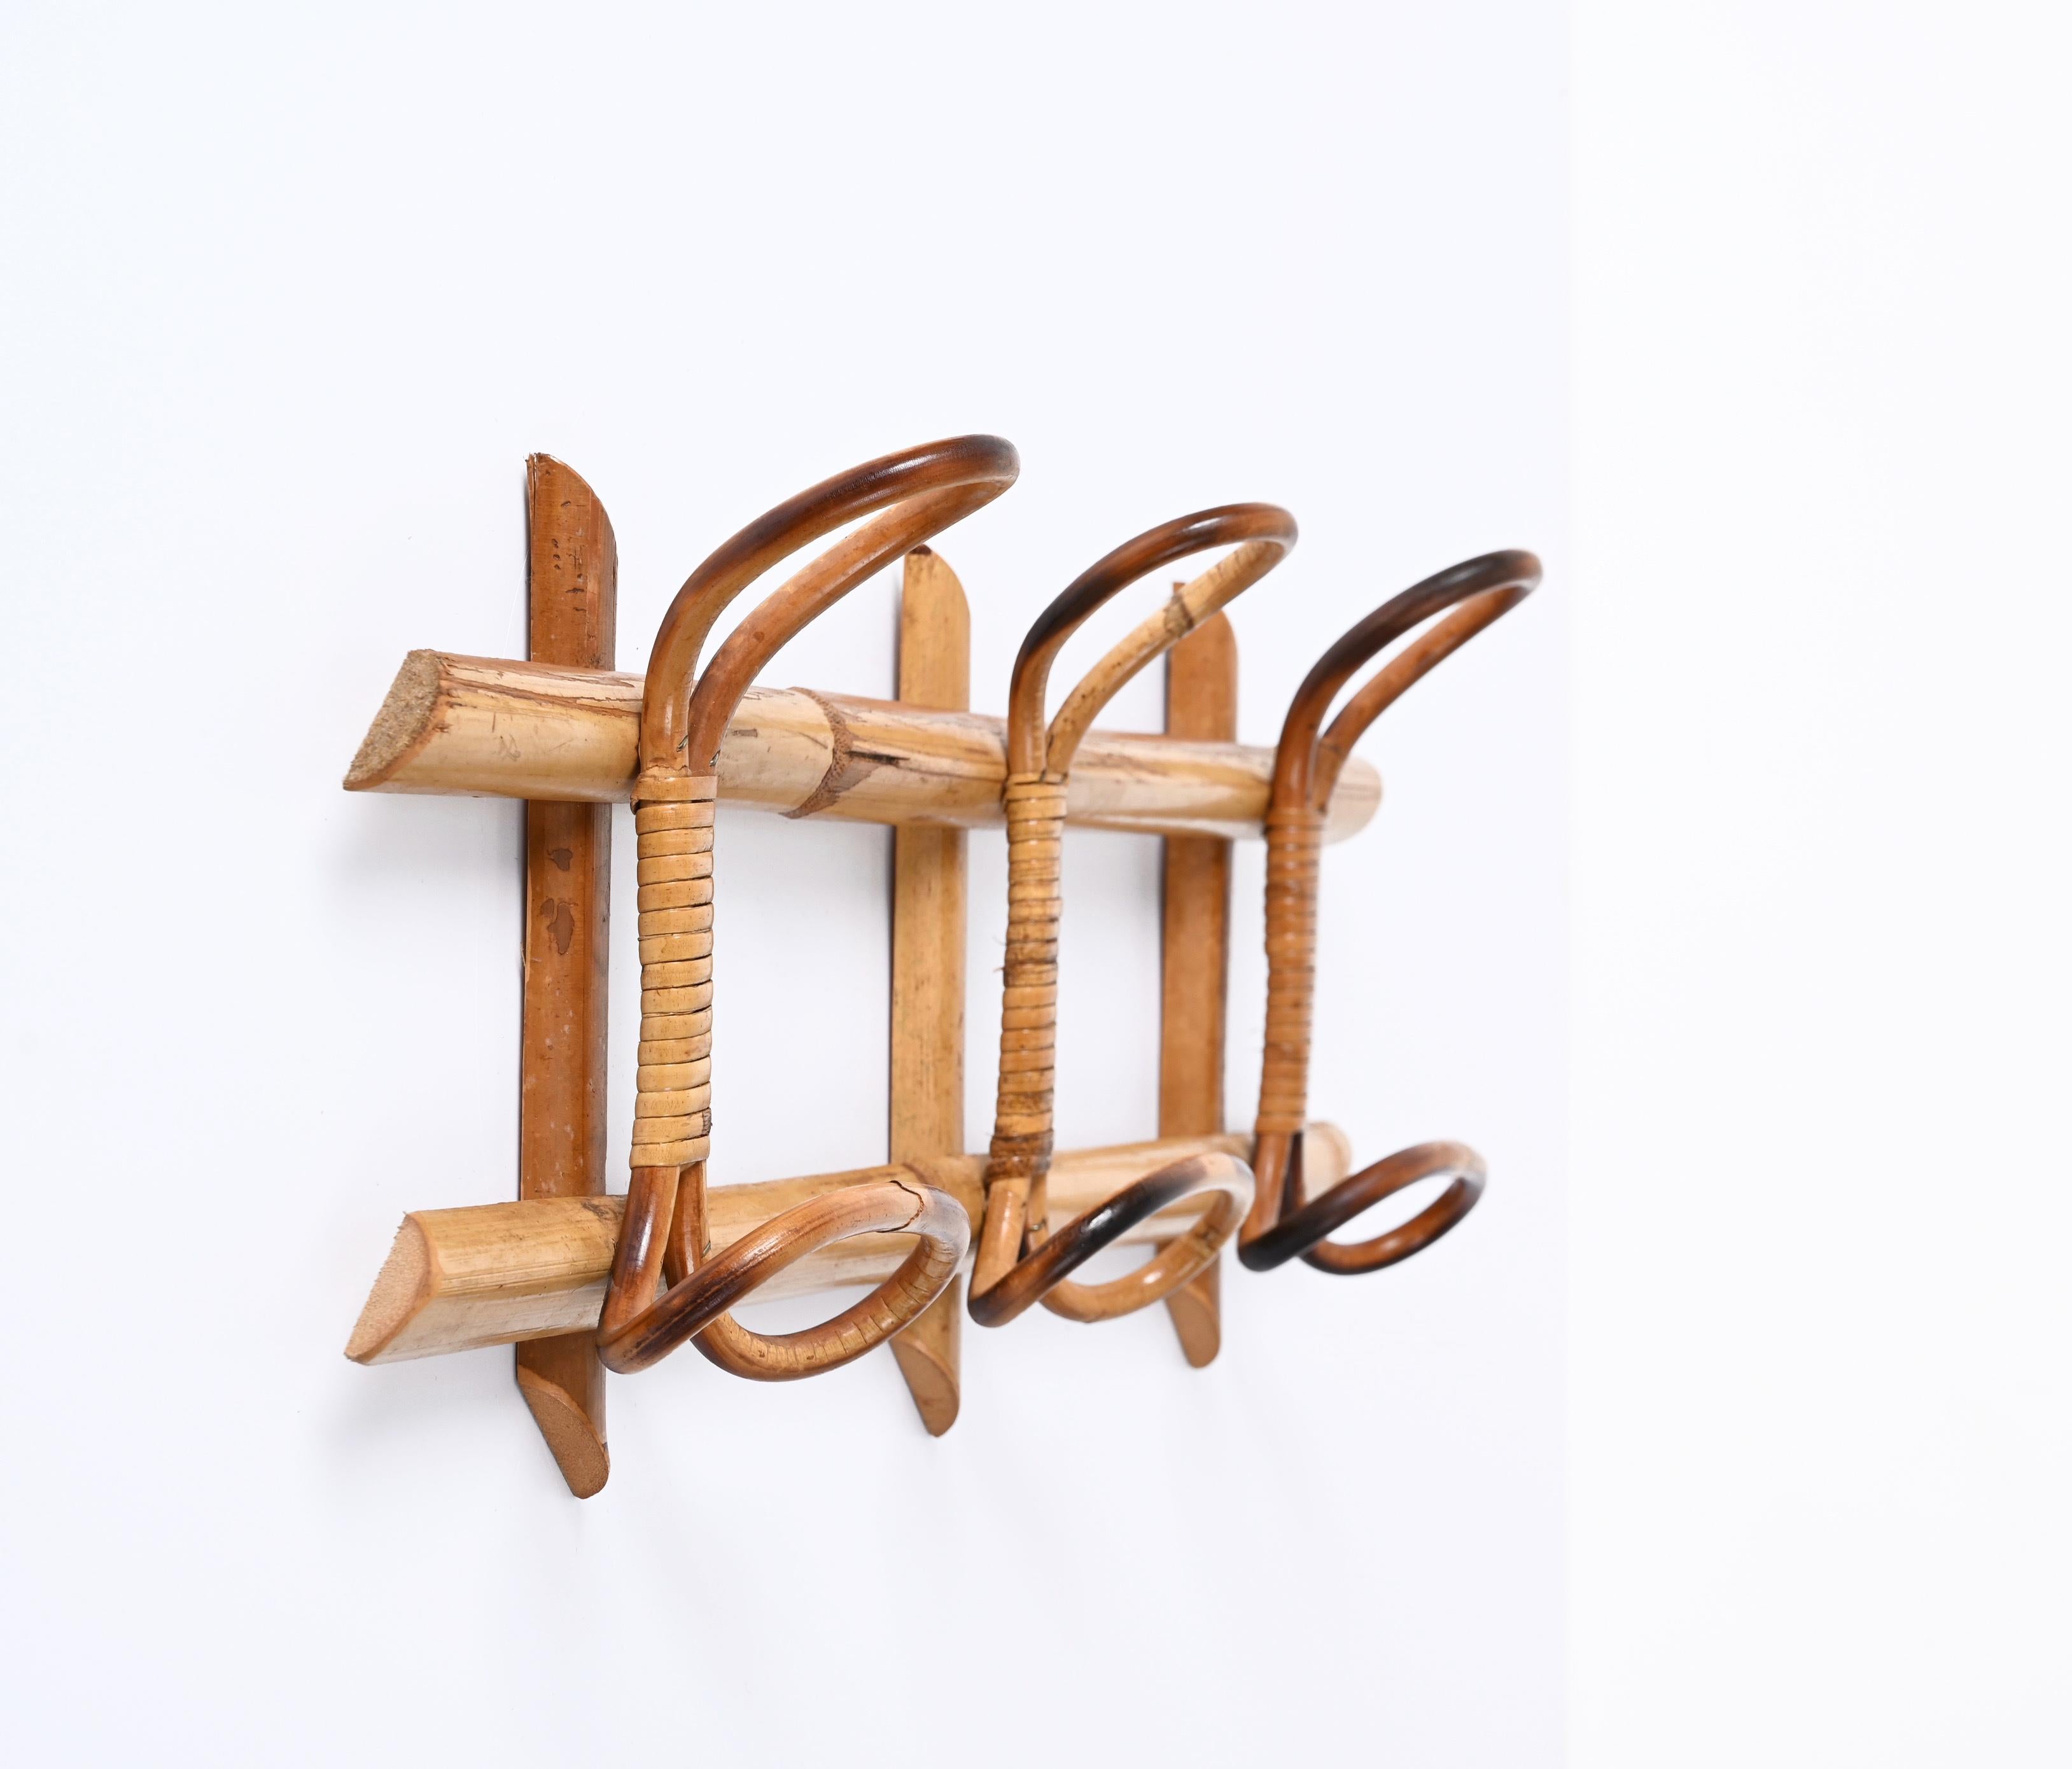 Amazing French Riviera midcentury rattan and bamboo coat hanger. This wonderful piece was made in Italy during the 1960s.

This unique item features a structure in bamboo canes and four brown rattan upper hooks and lower hooks for hanging coats. The